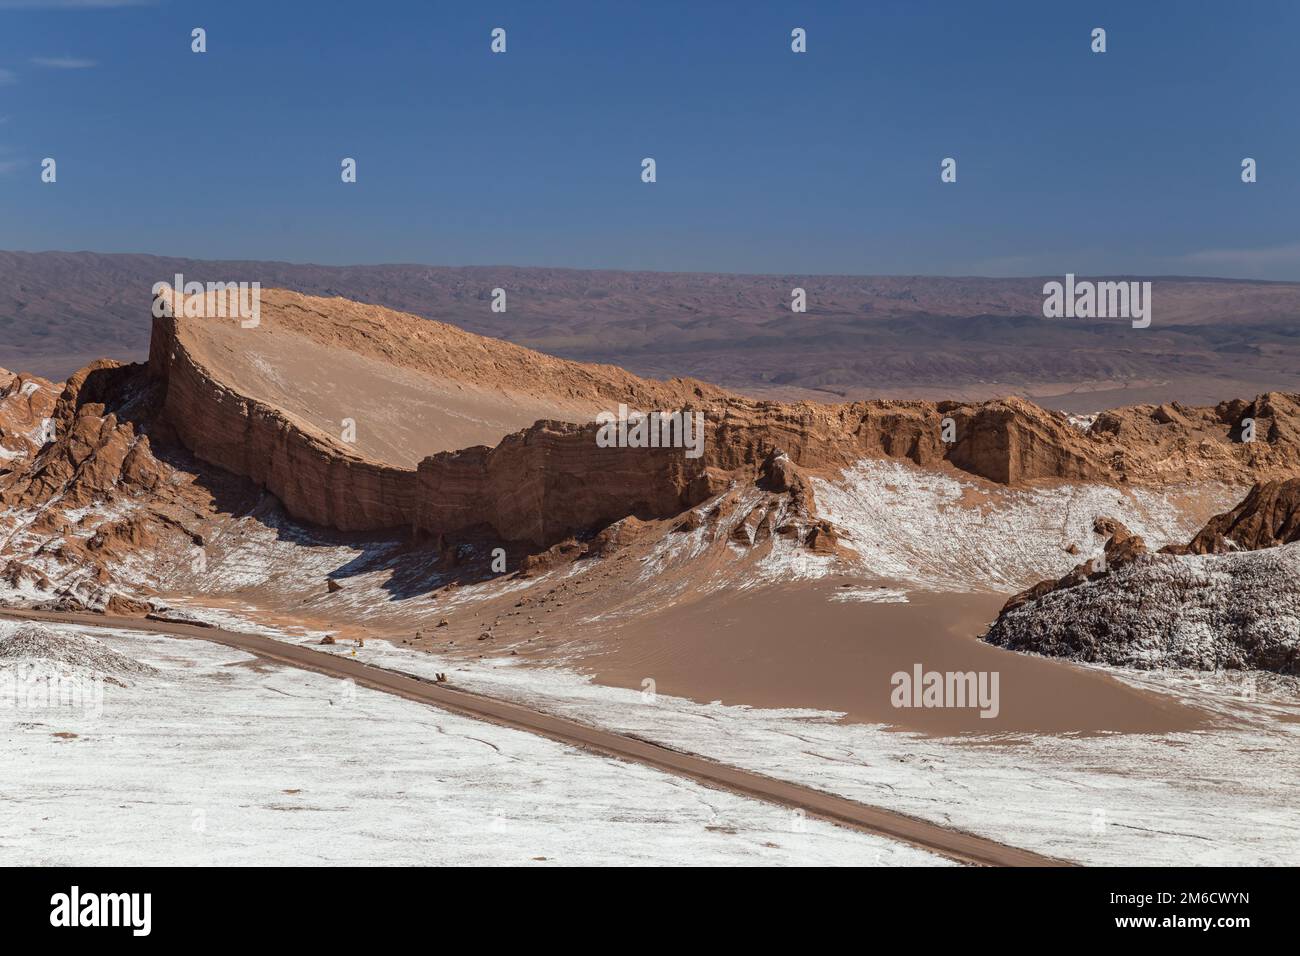 Dunes and rock formations covered with dry salt in Valle de la Luna, Atacama, Chile Stock Photo